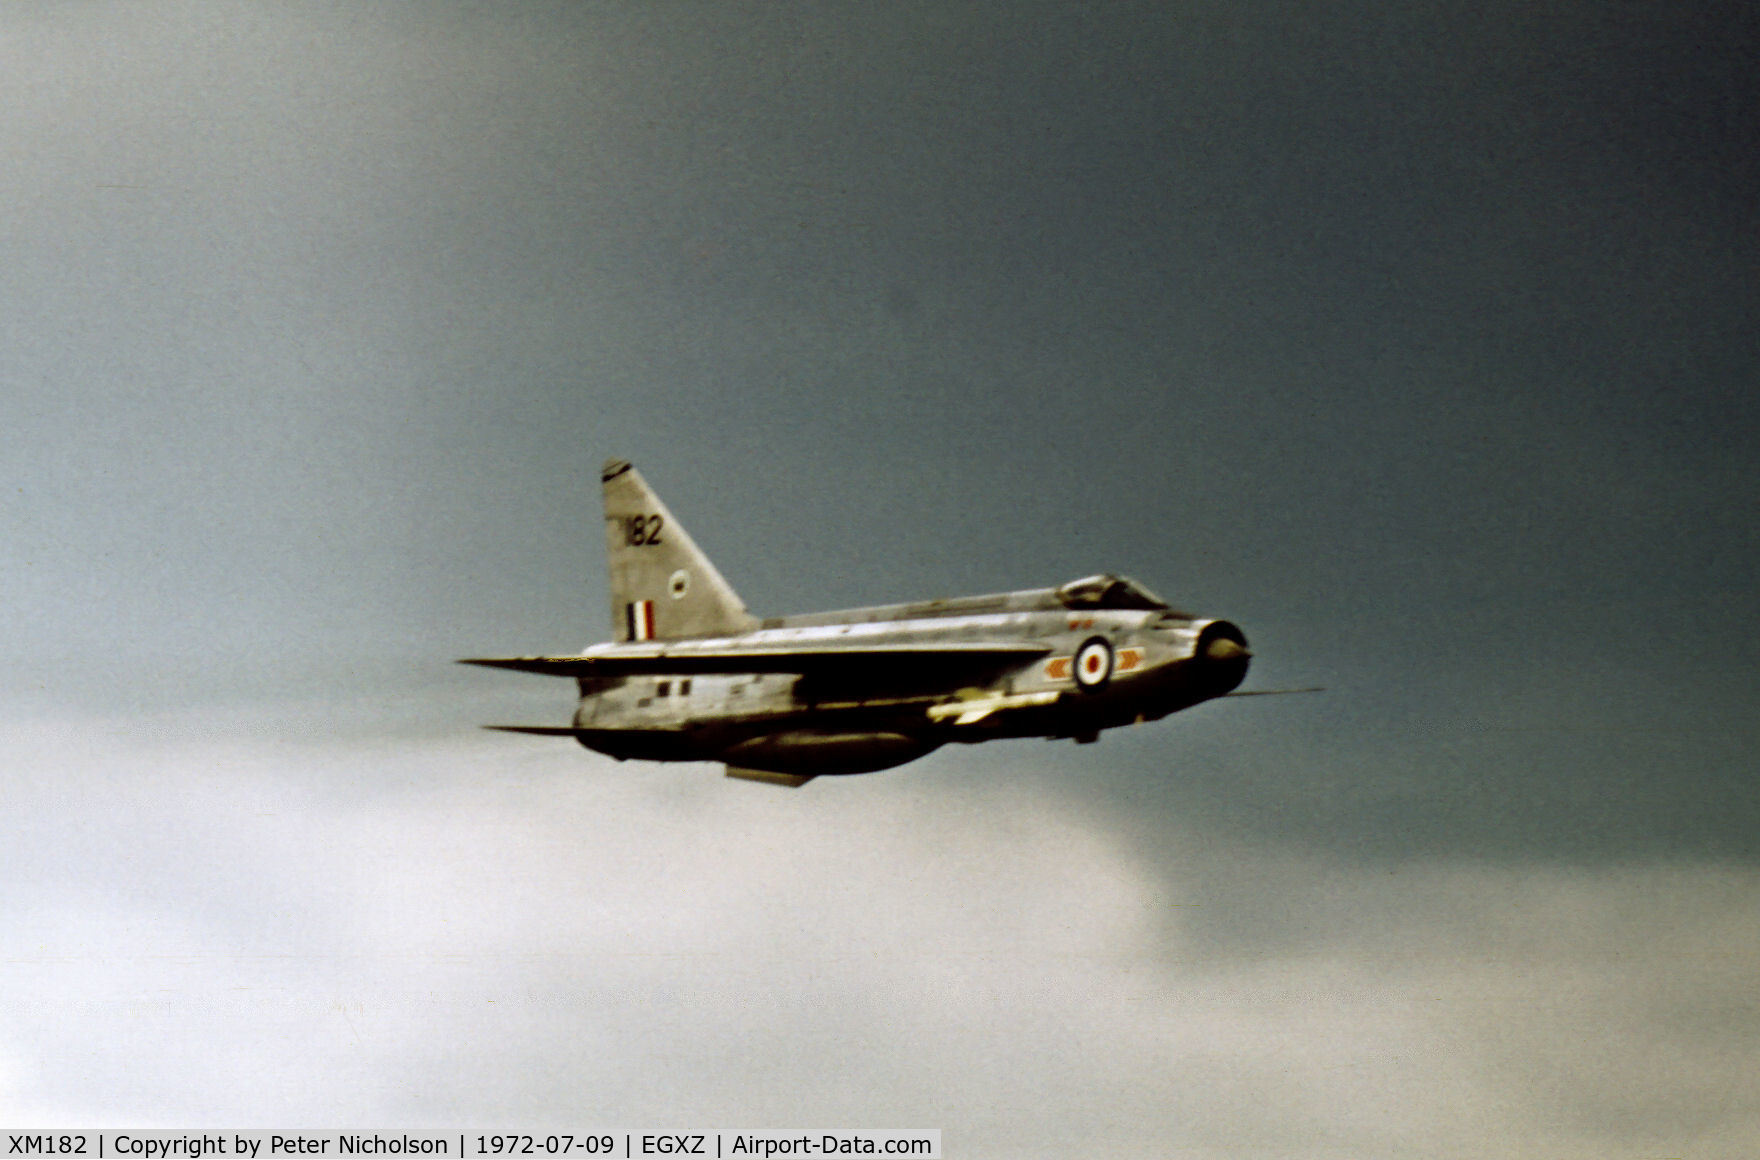 XM182, 1961 English Electric Lightning F.1A C/N 95069, Lightning F.1A of 226 Operational Conversion Unit in action at the 1972 RAF Topcliffe Airshow.